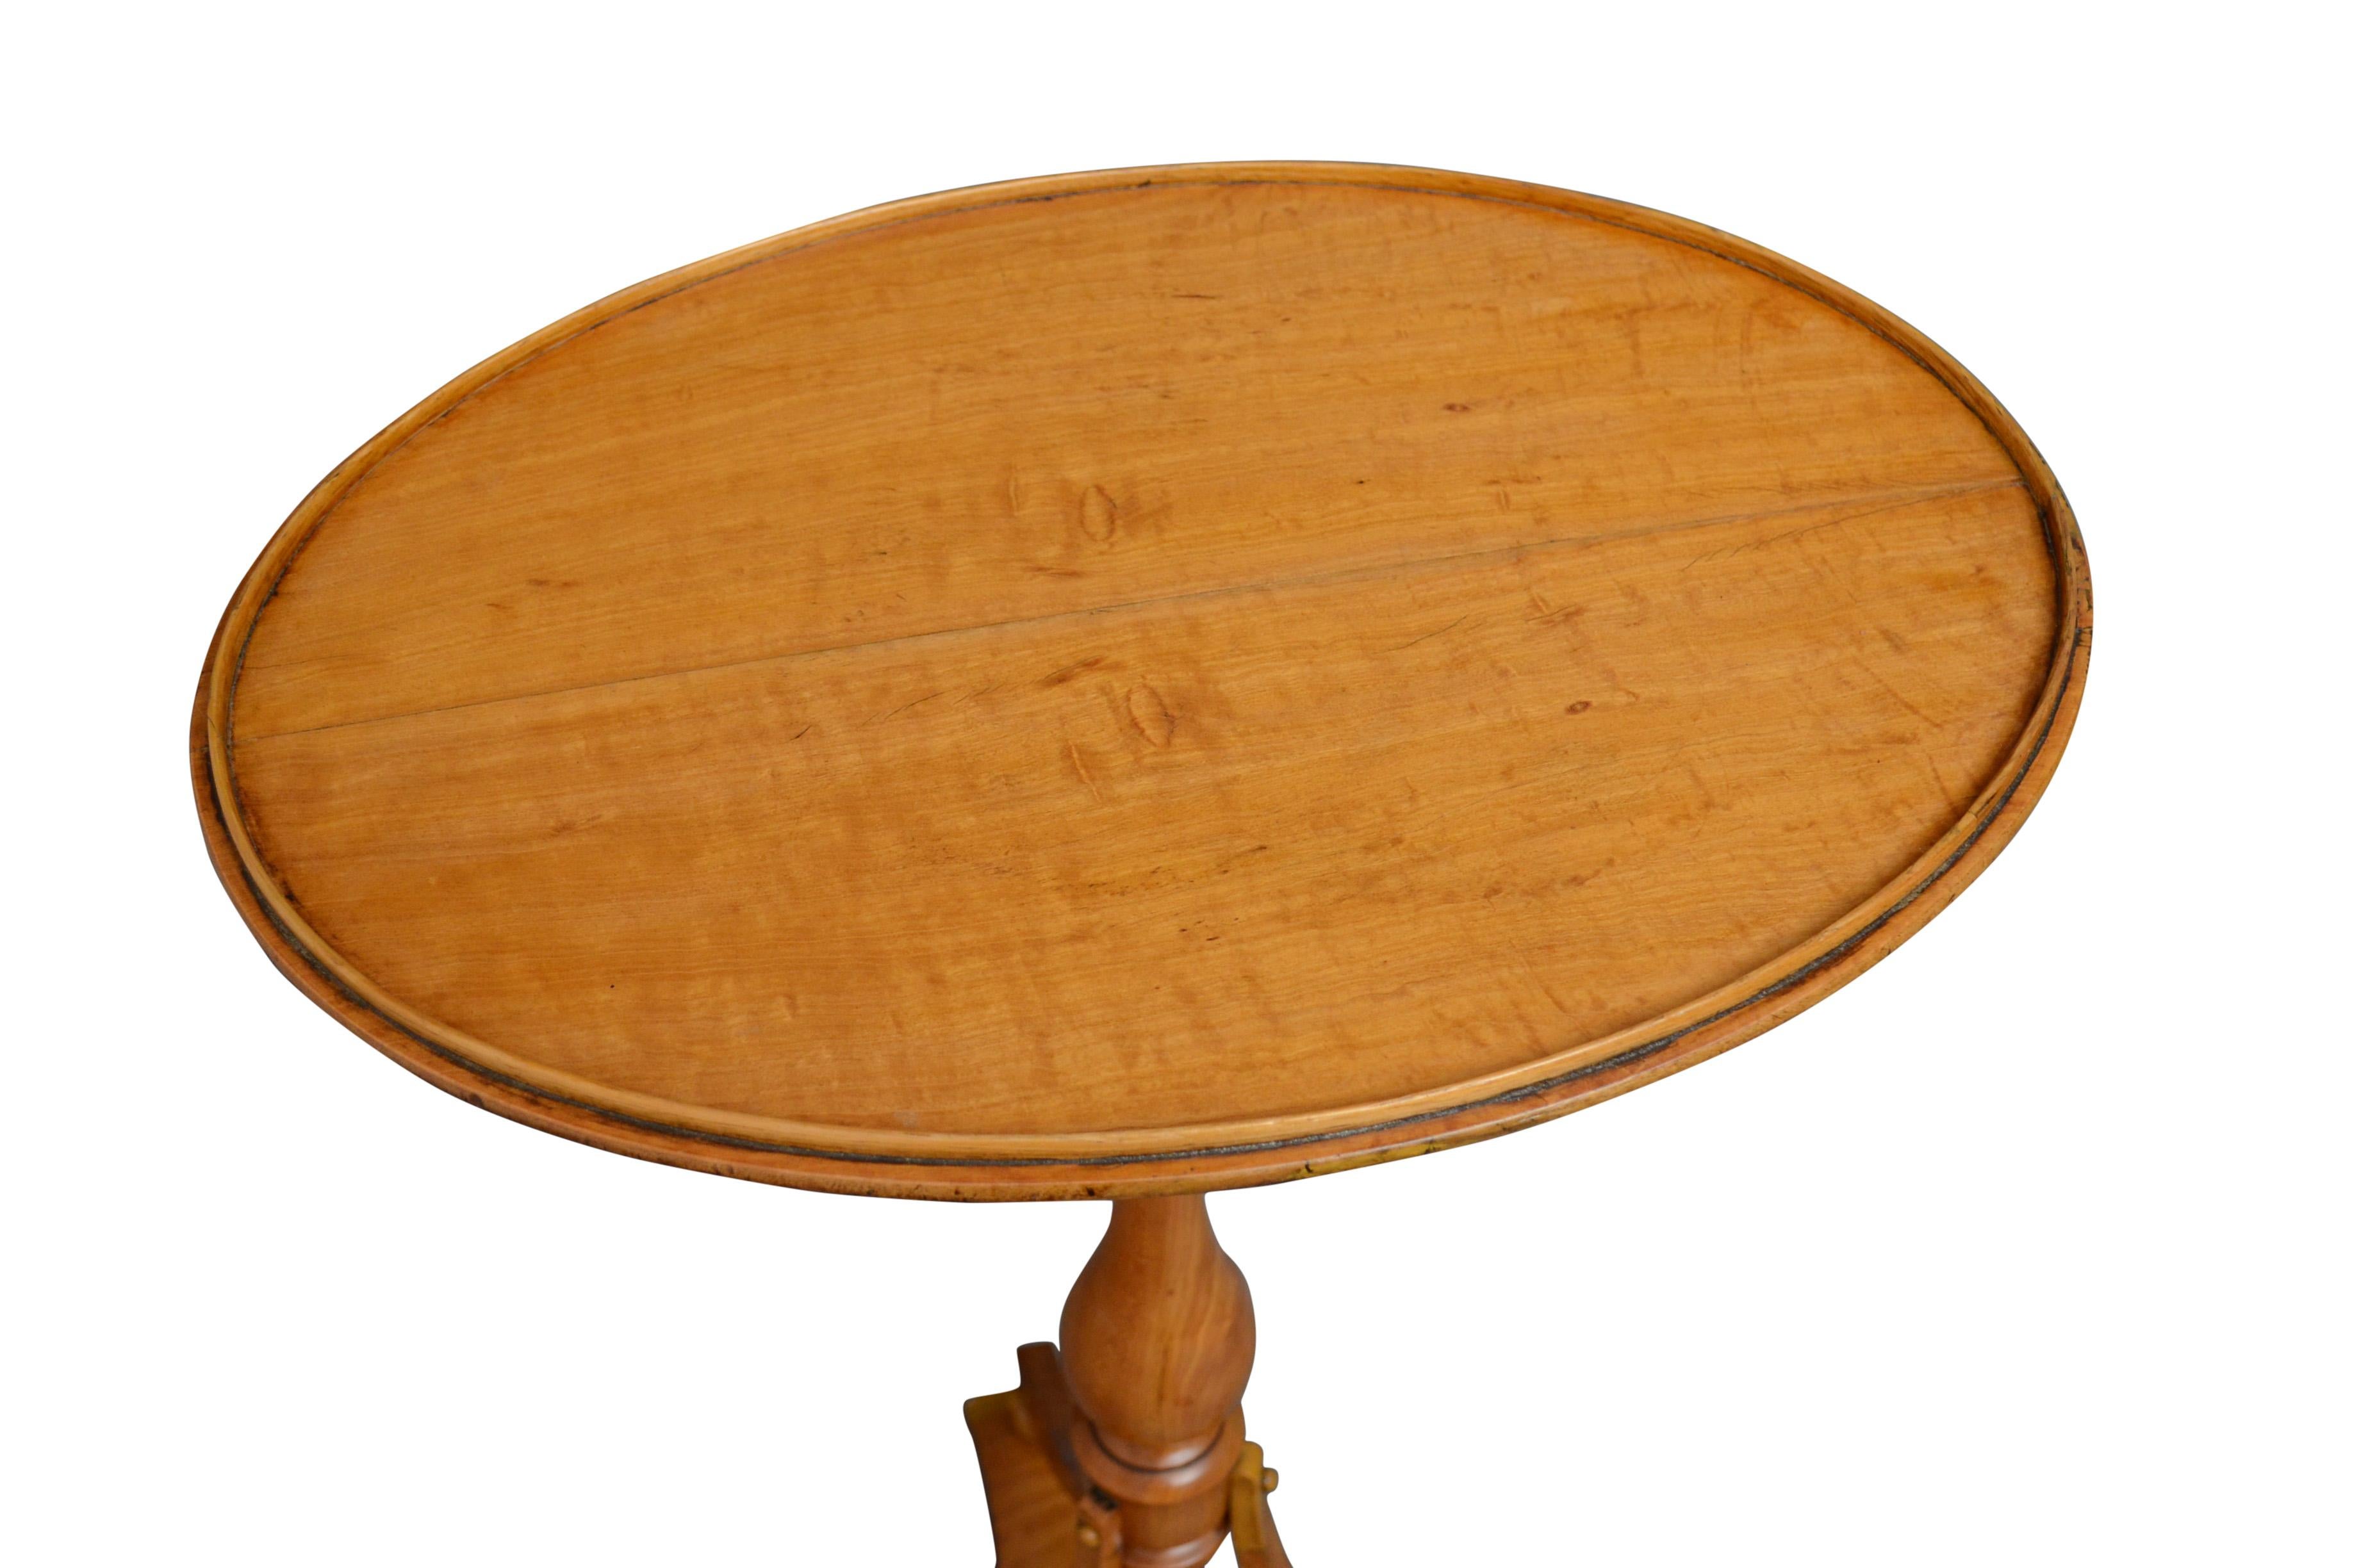 K0446 stylish late Victorian lamp table in satinwood, having oval top and turned column terminating in trefoil base and bun feet. This antique table retains its original finish with minor touching up and is in home ready condition. C1890
Measures: